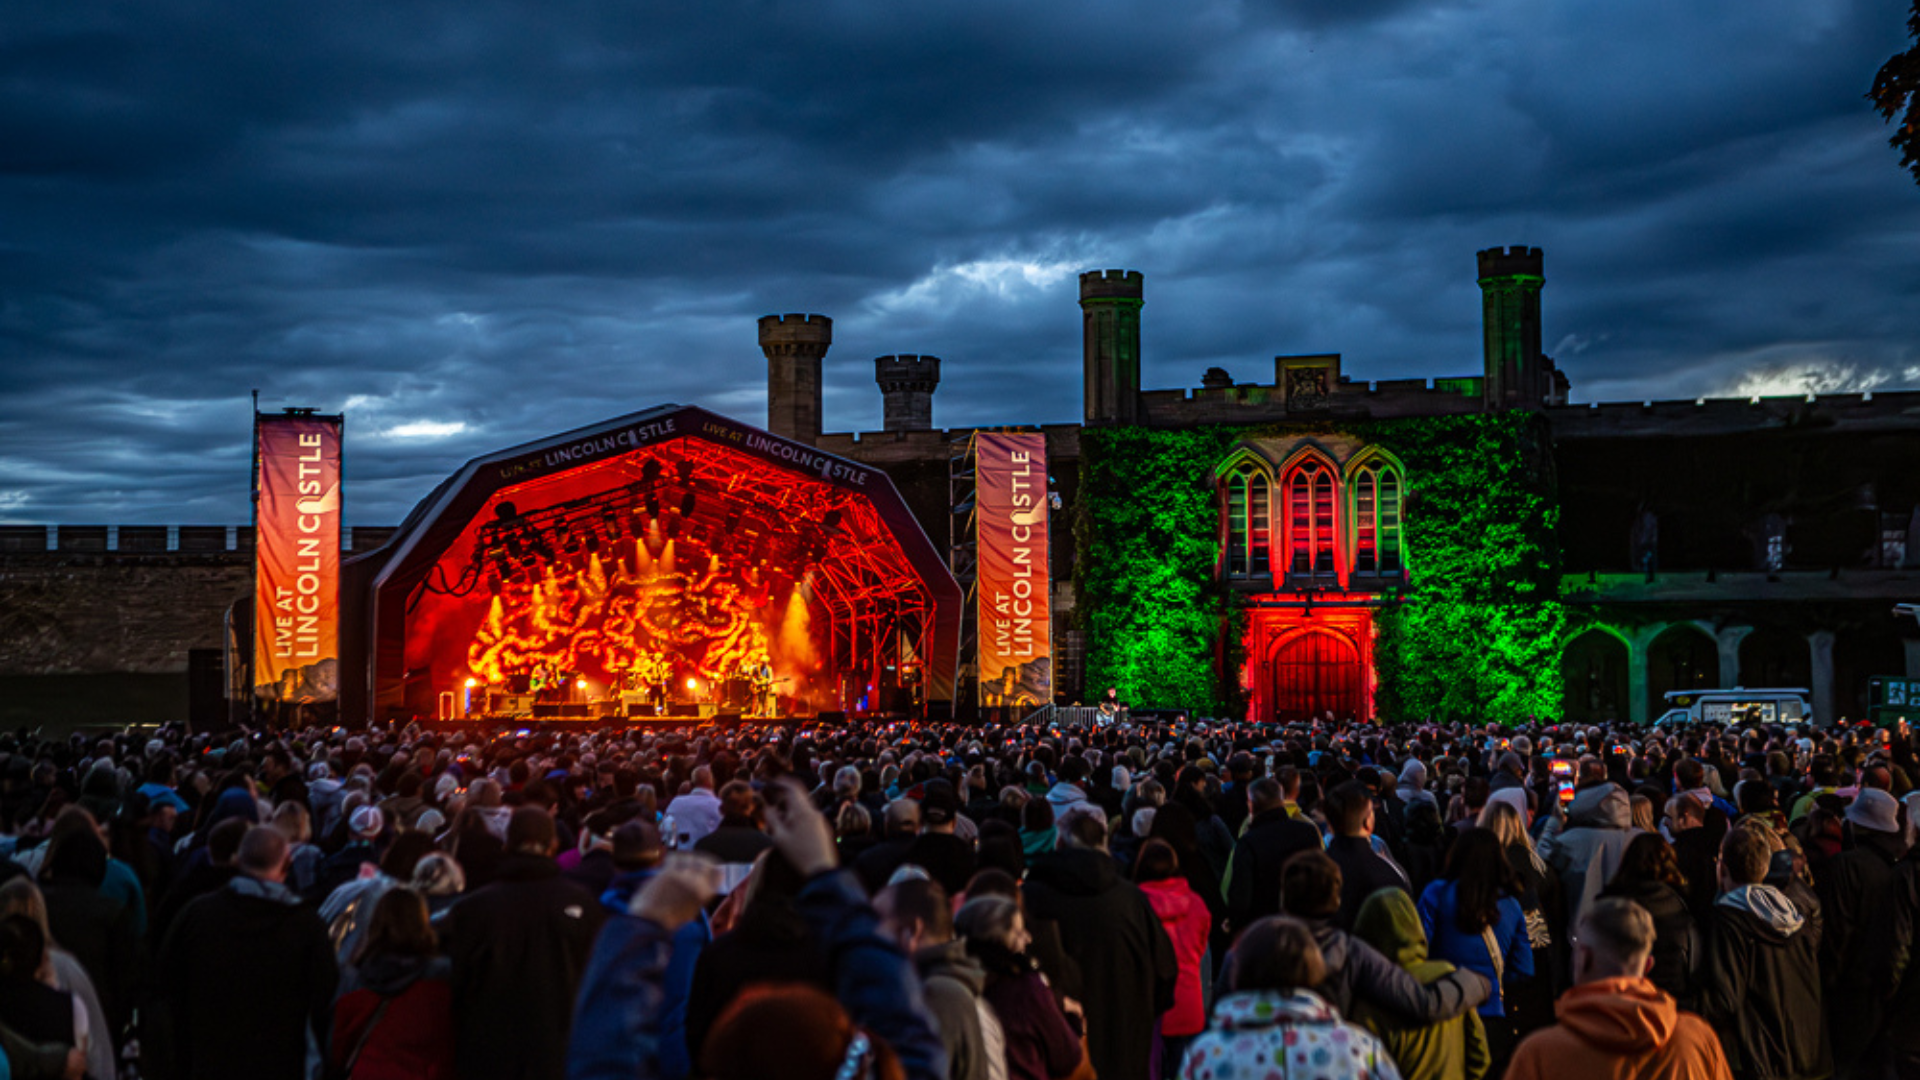 Stage in Lincoln Castle lit up at night with large crowd in front